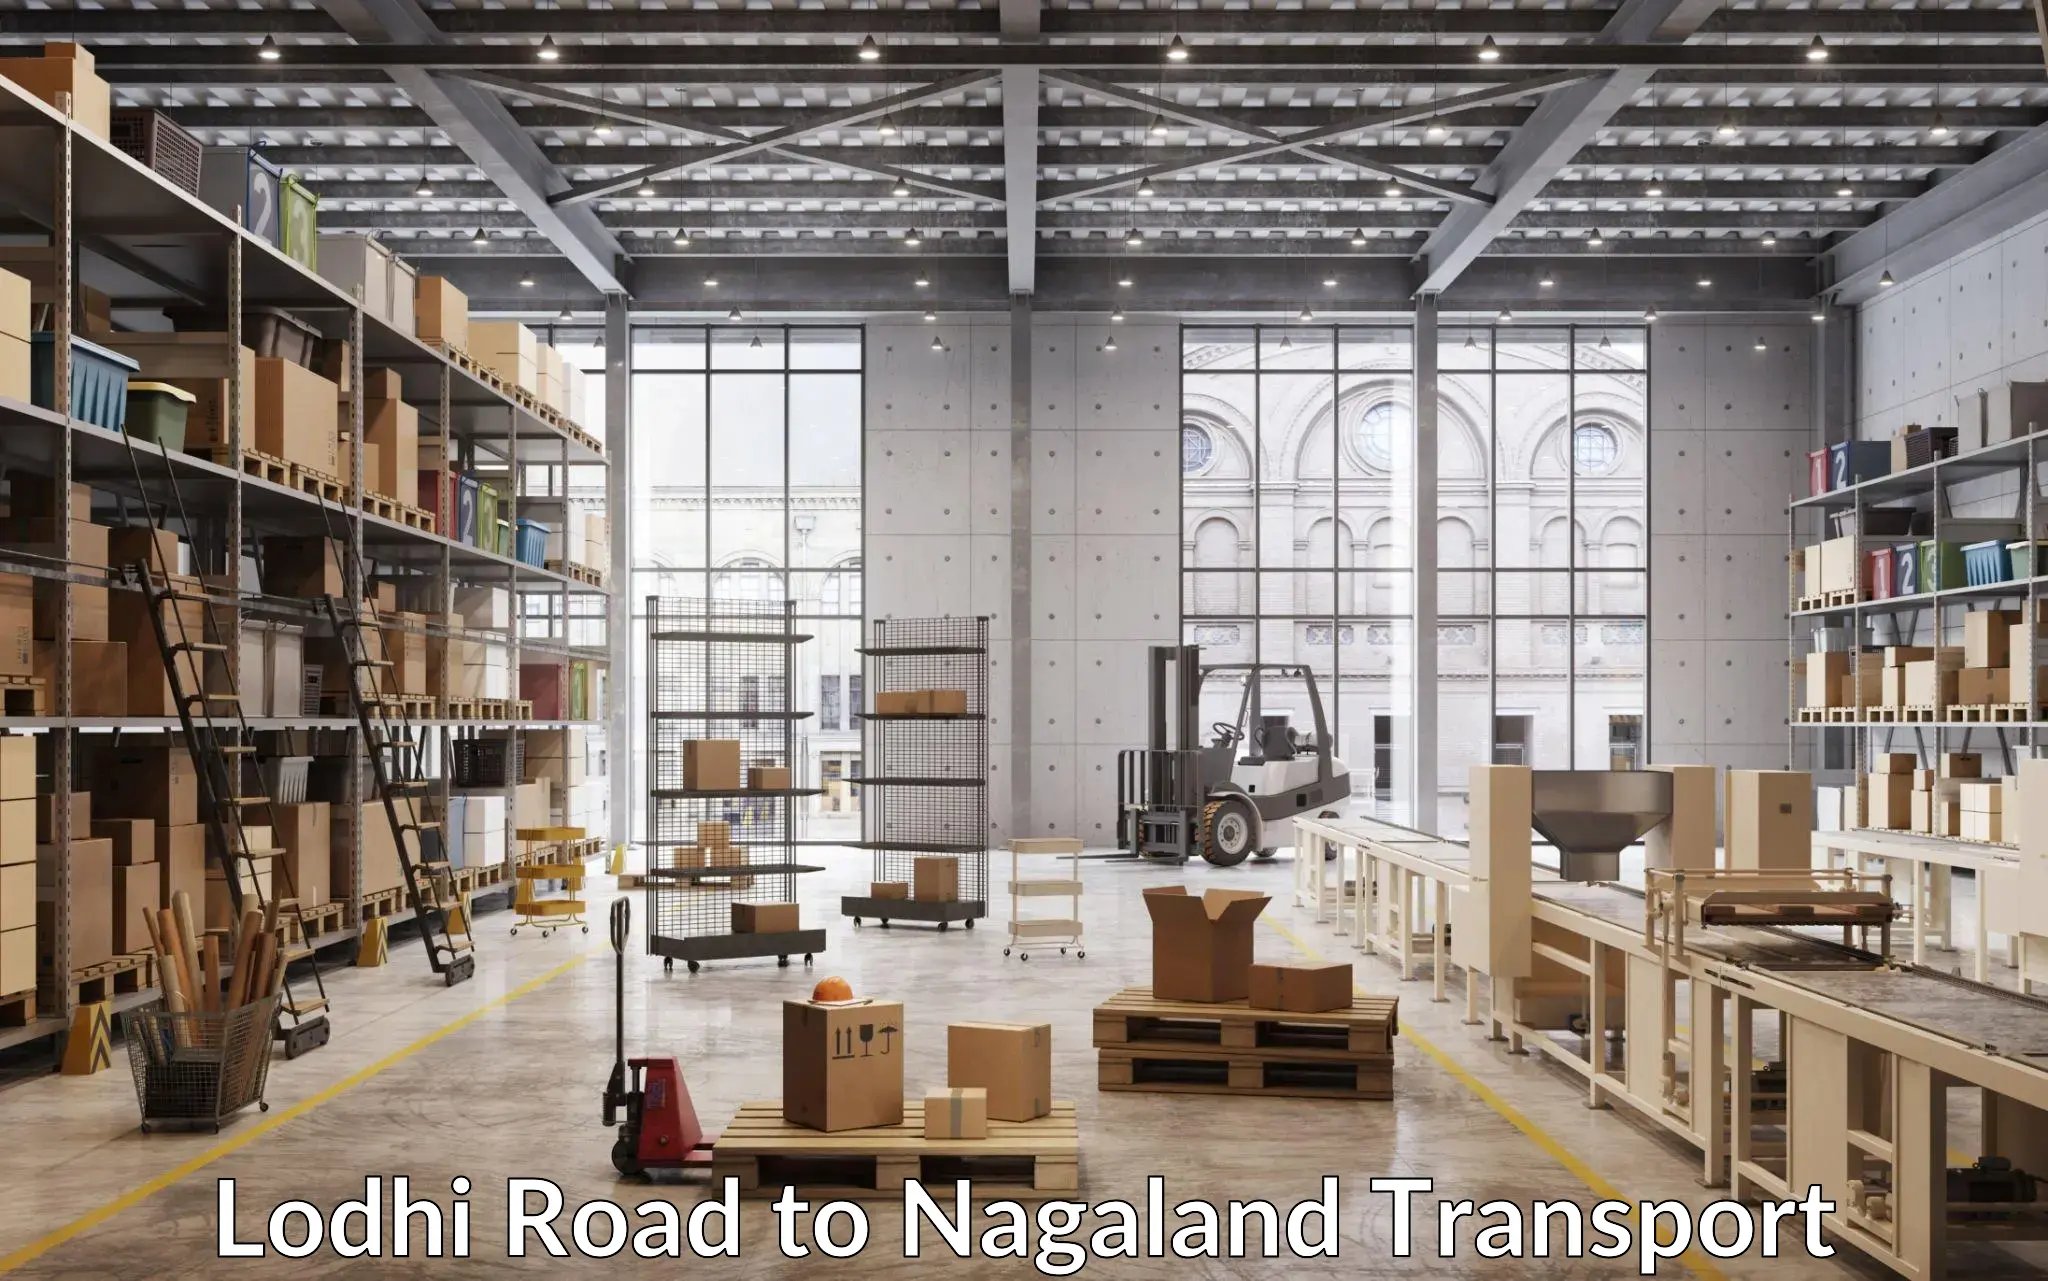 Lorry transport service Lodhi Road to Nagaland